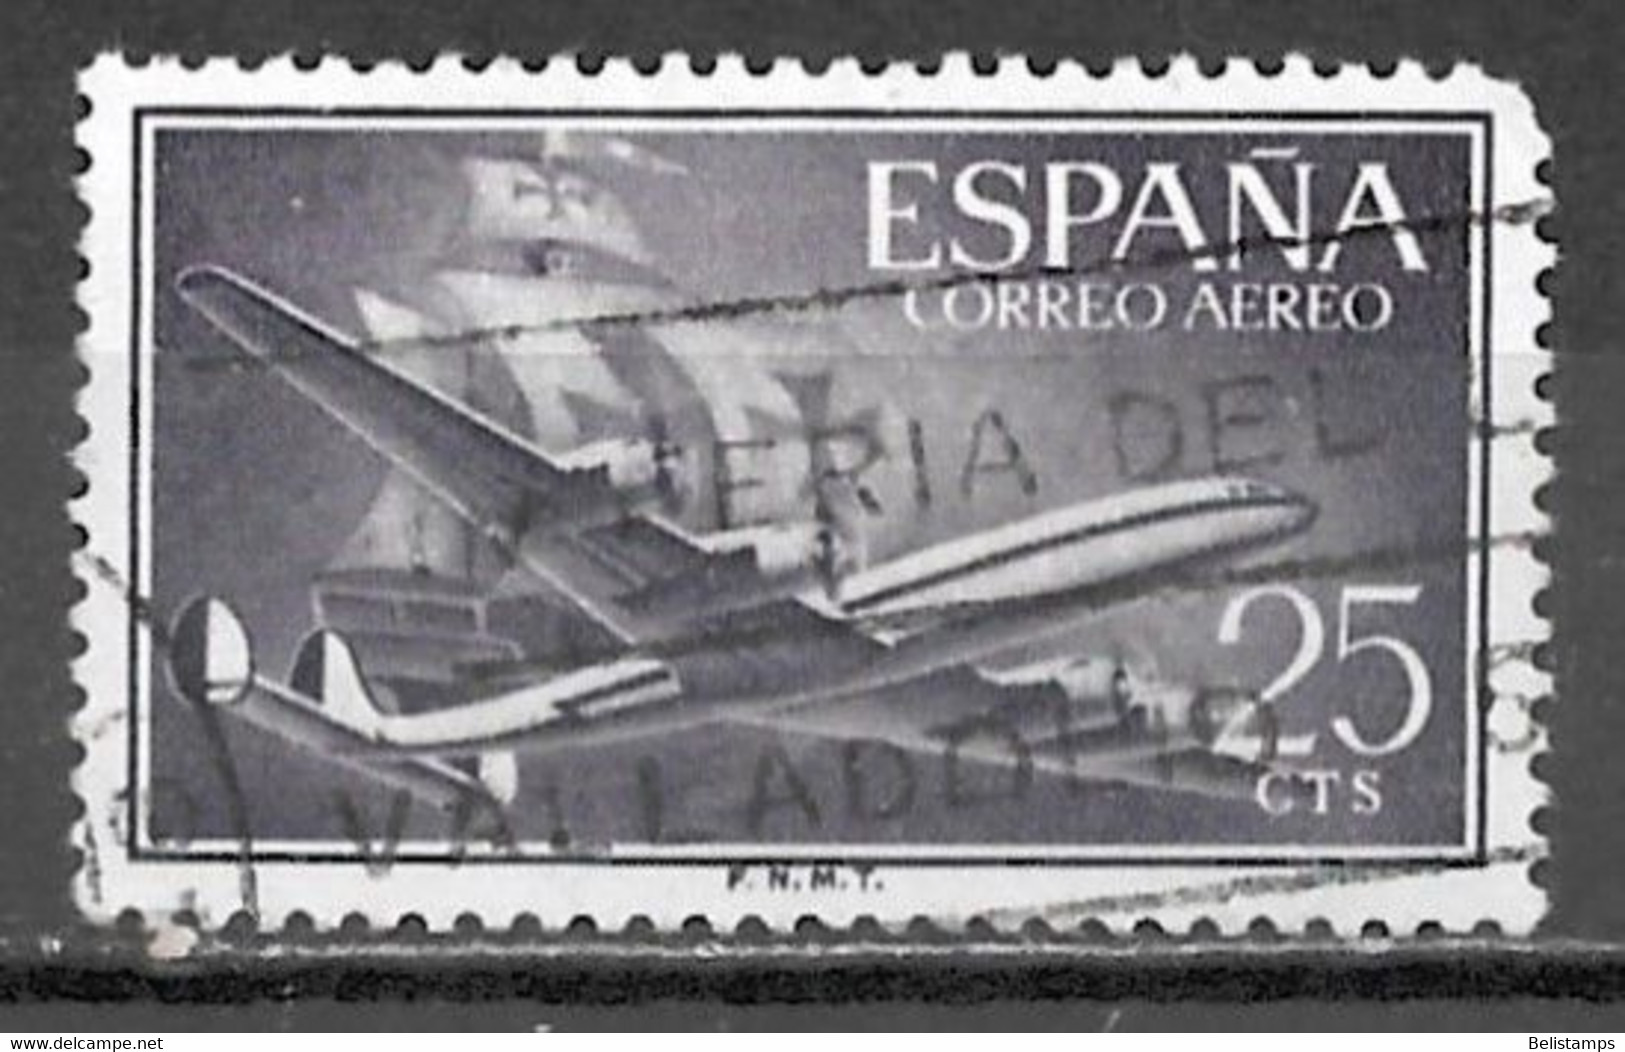 Spain 1955. Scott #C148 (U) Plane And Caravel - Used Stamps